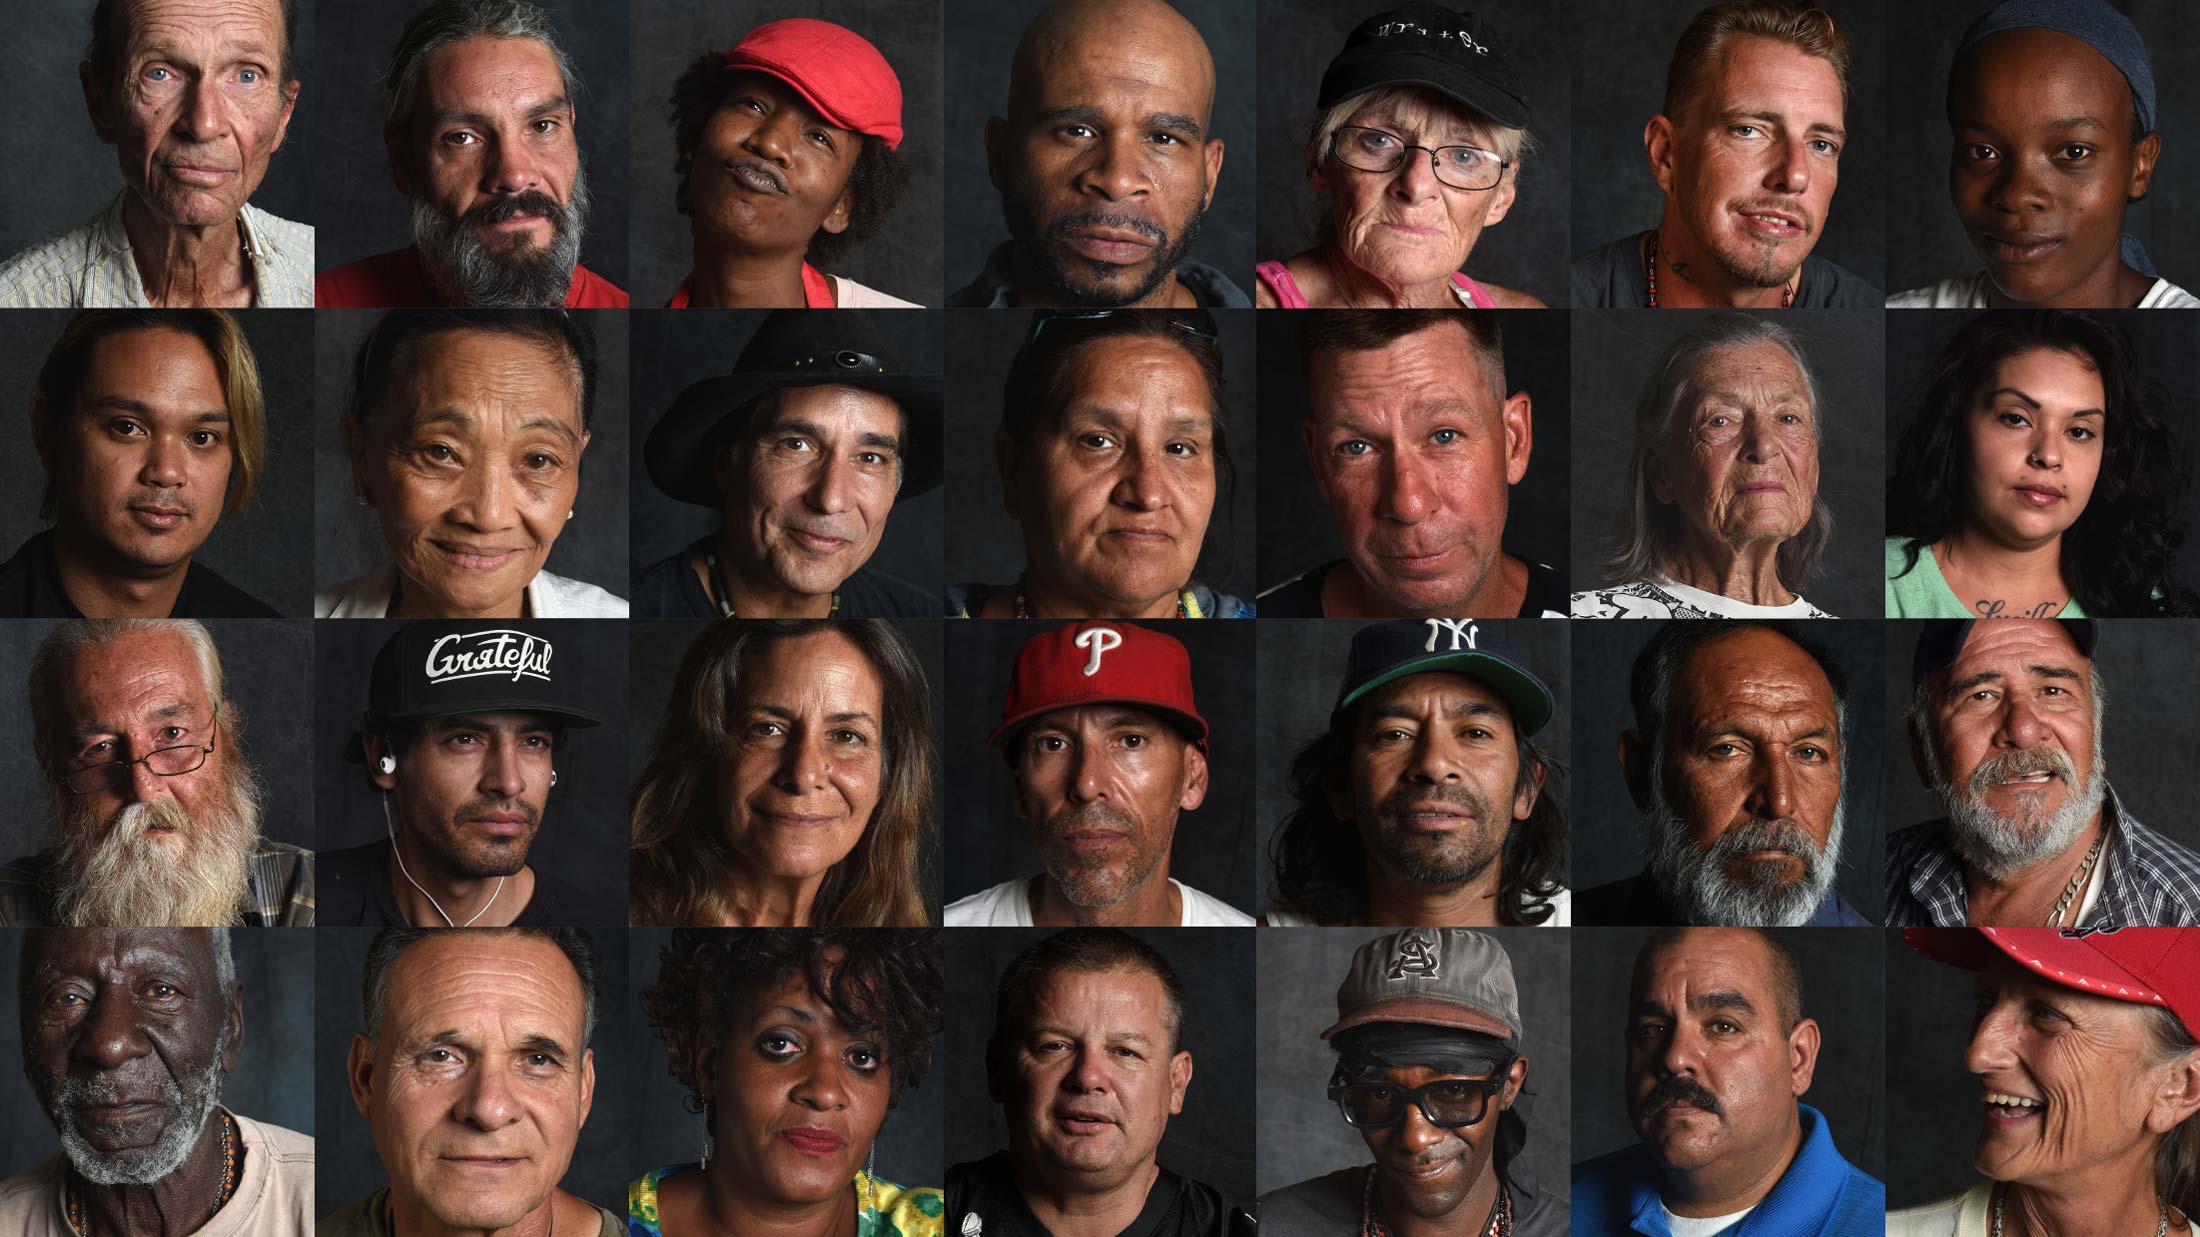 A collage of close-up portraits of 21 different people of different ages, genders, and ethnicities